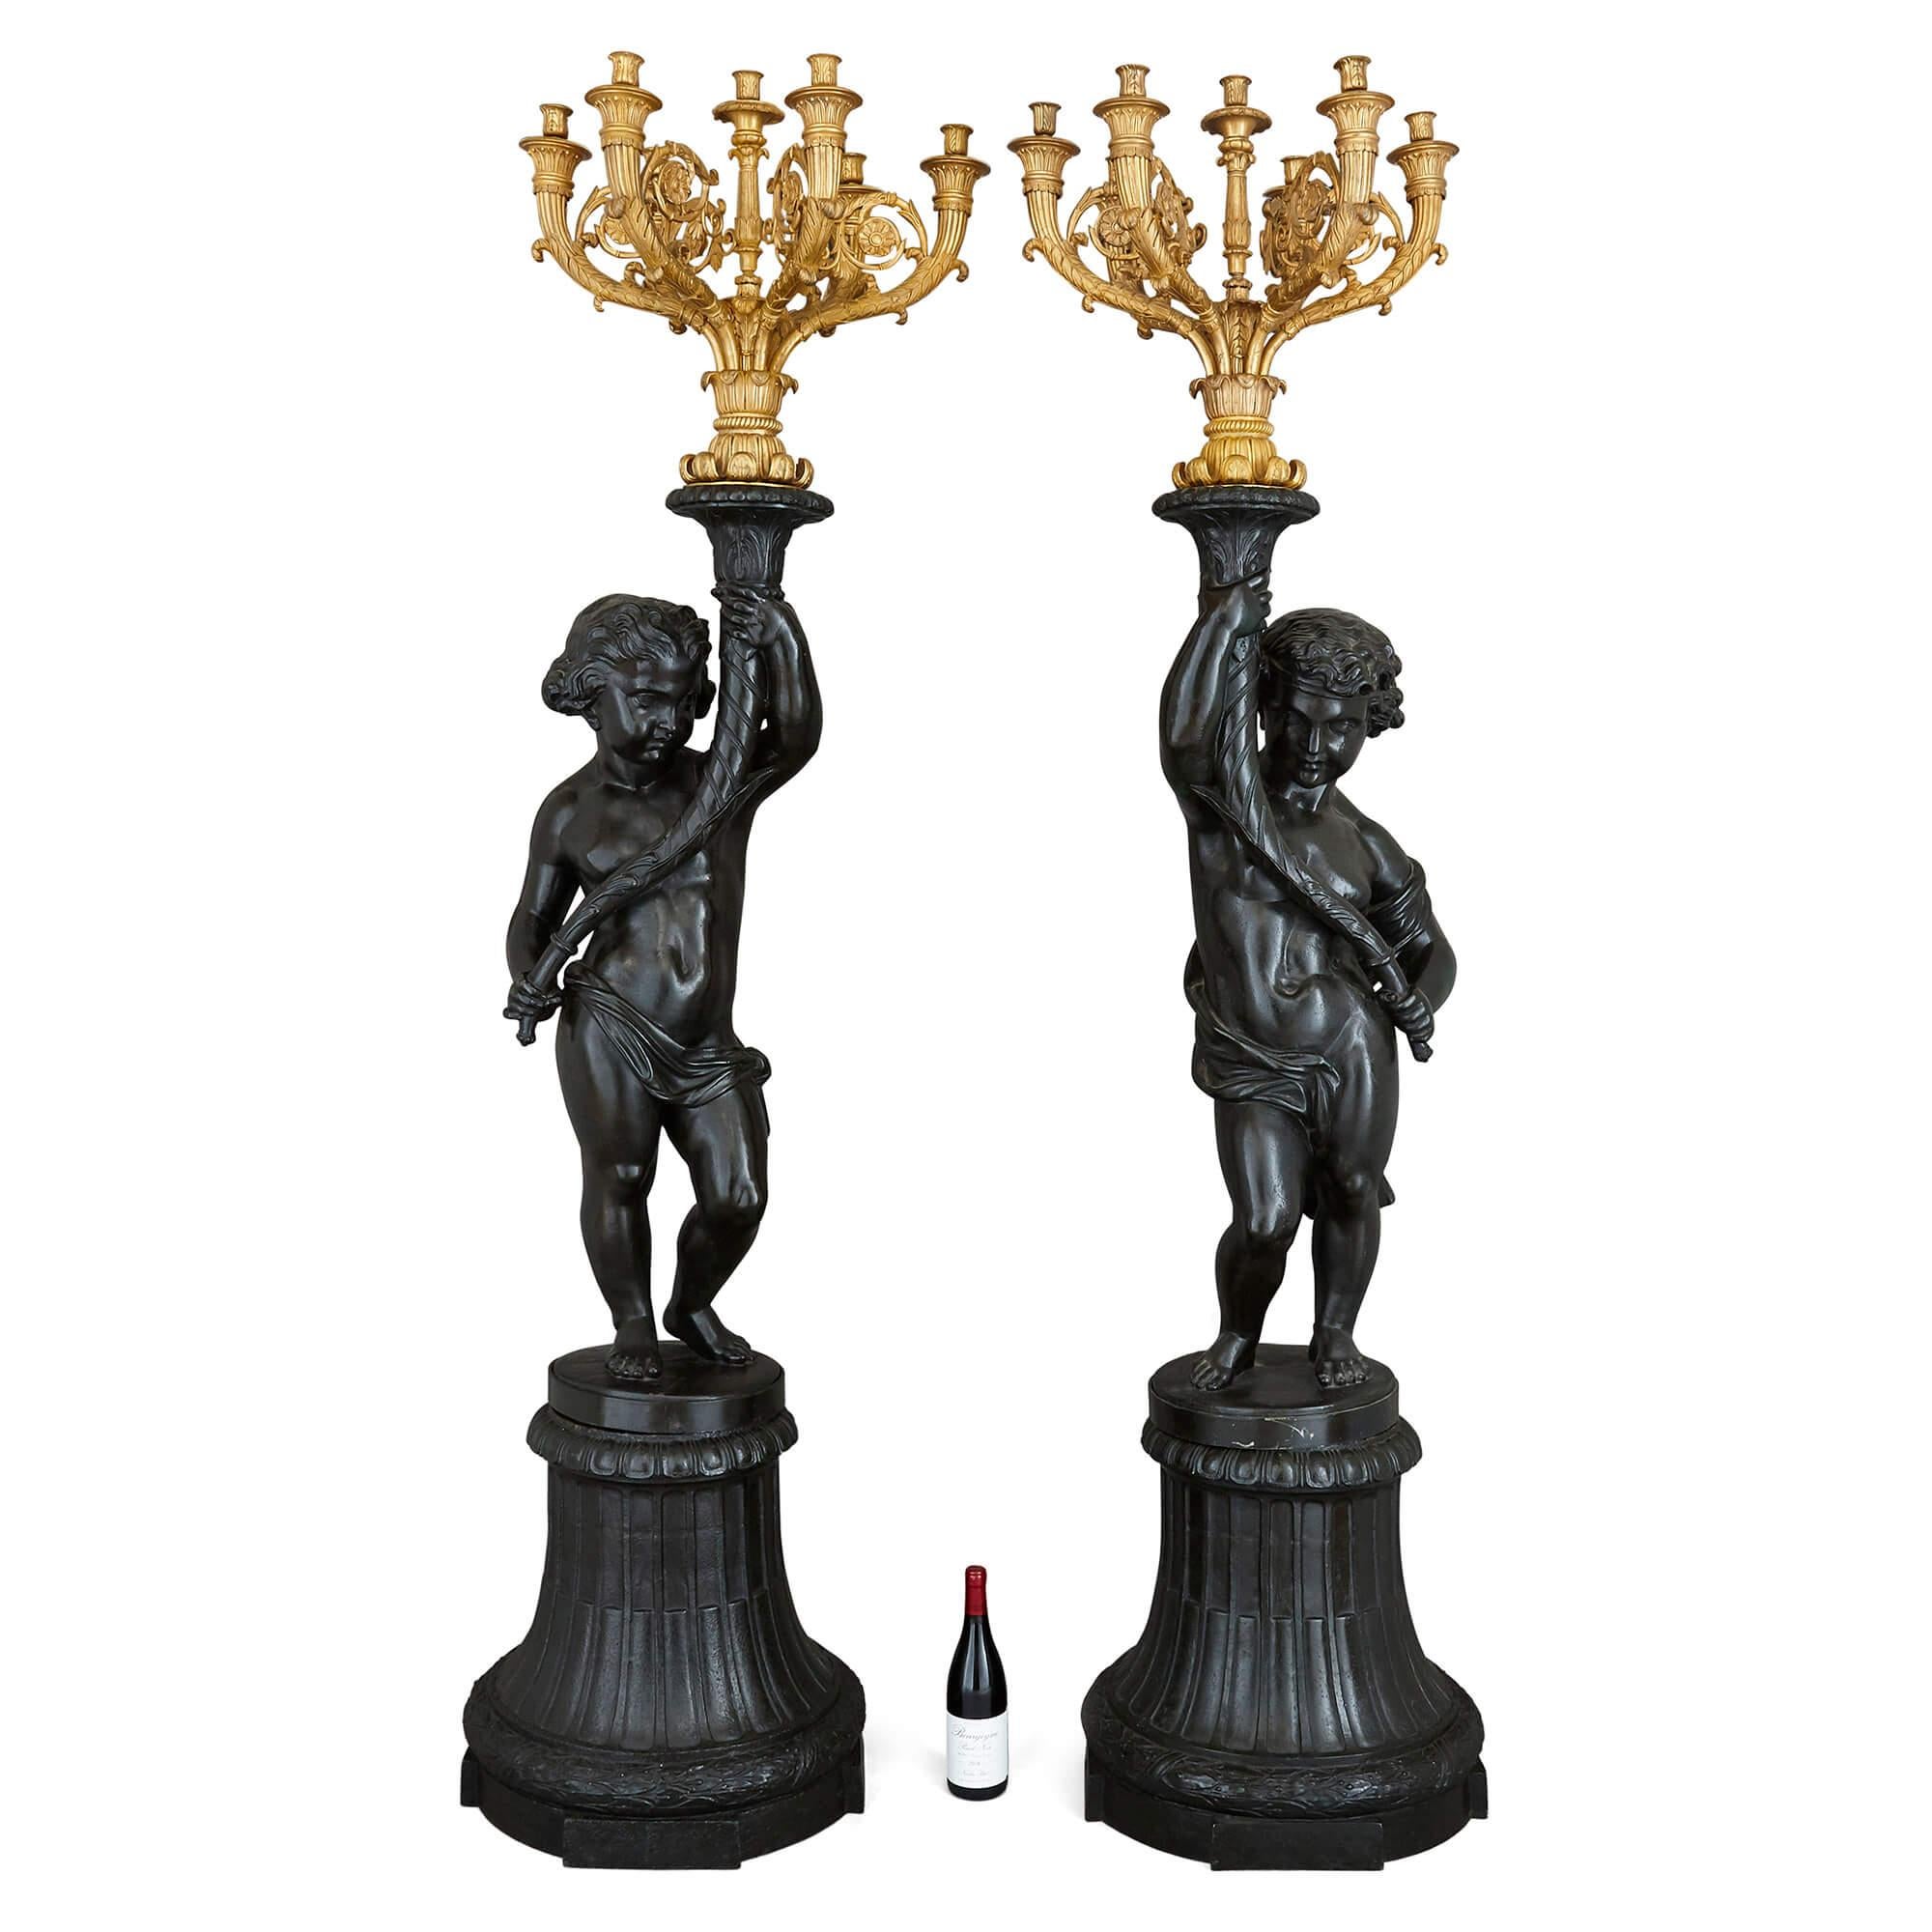 Pair of antique monumental cast iron and gilt bronze candelabra
French, late 19th Century
Height 219cm, width 52cm, depth 52cm

This exceptional pair of monumental candelabra is designed in the elegant Neoclassical style. Each candelabrum in the